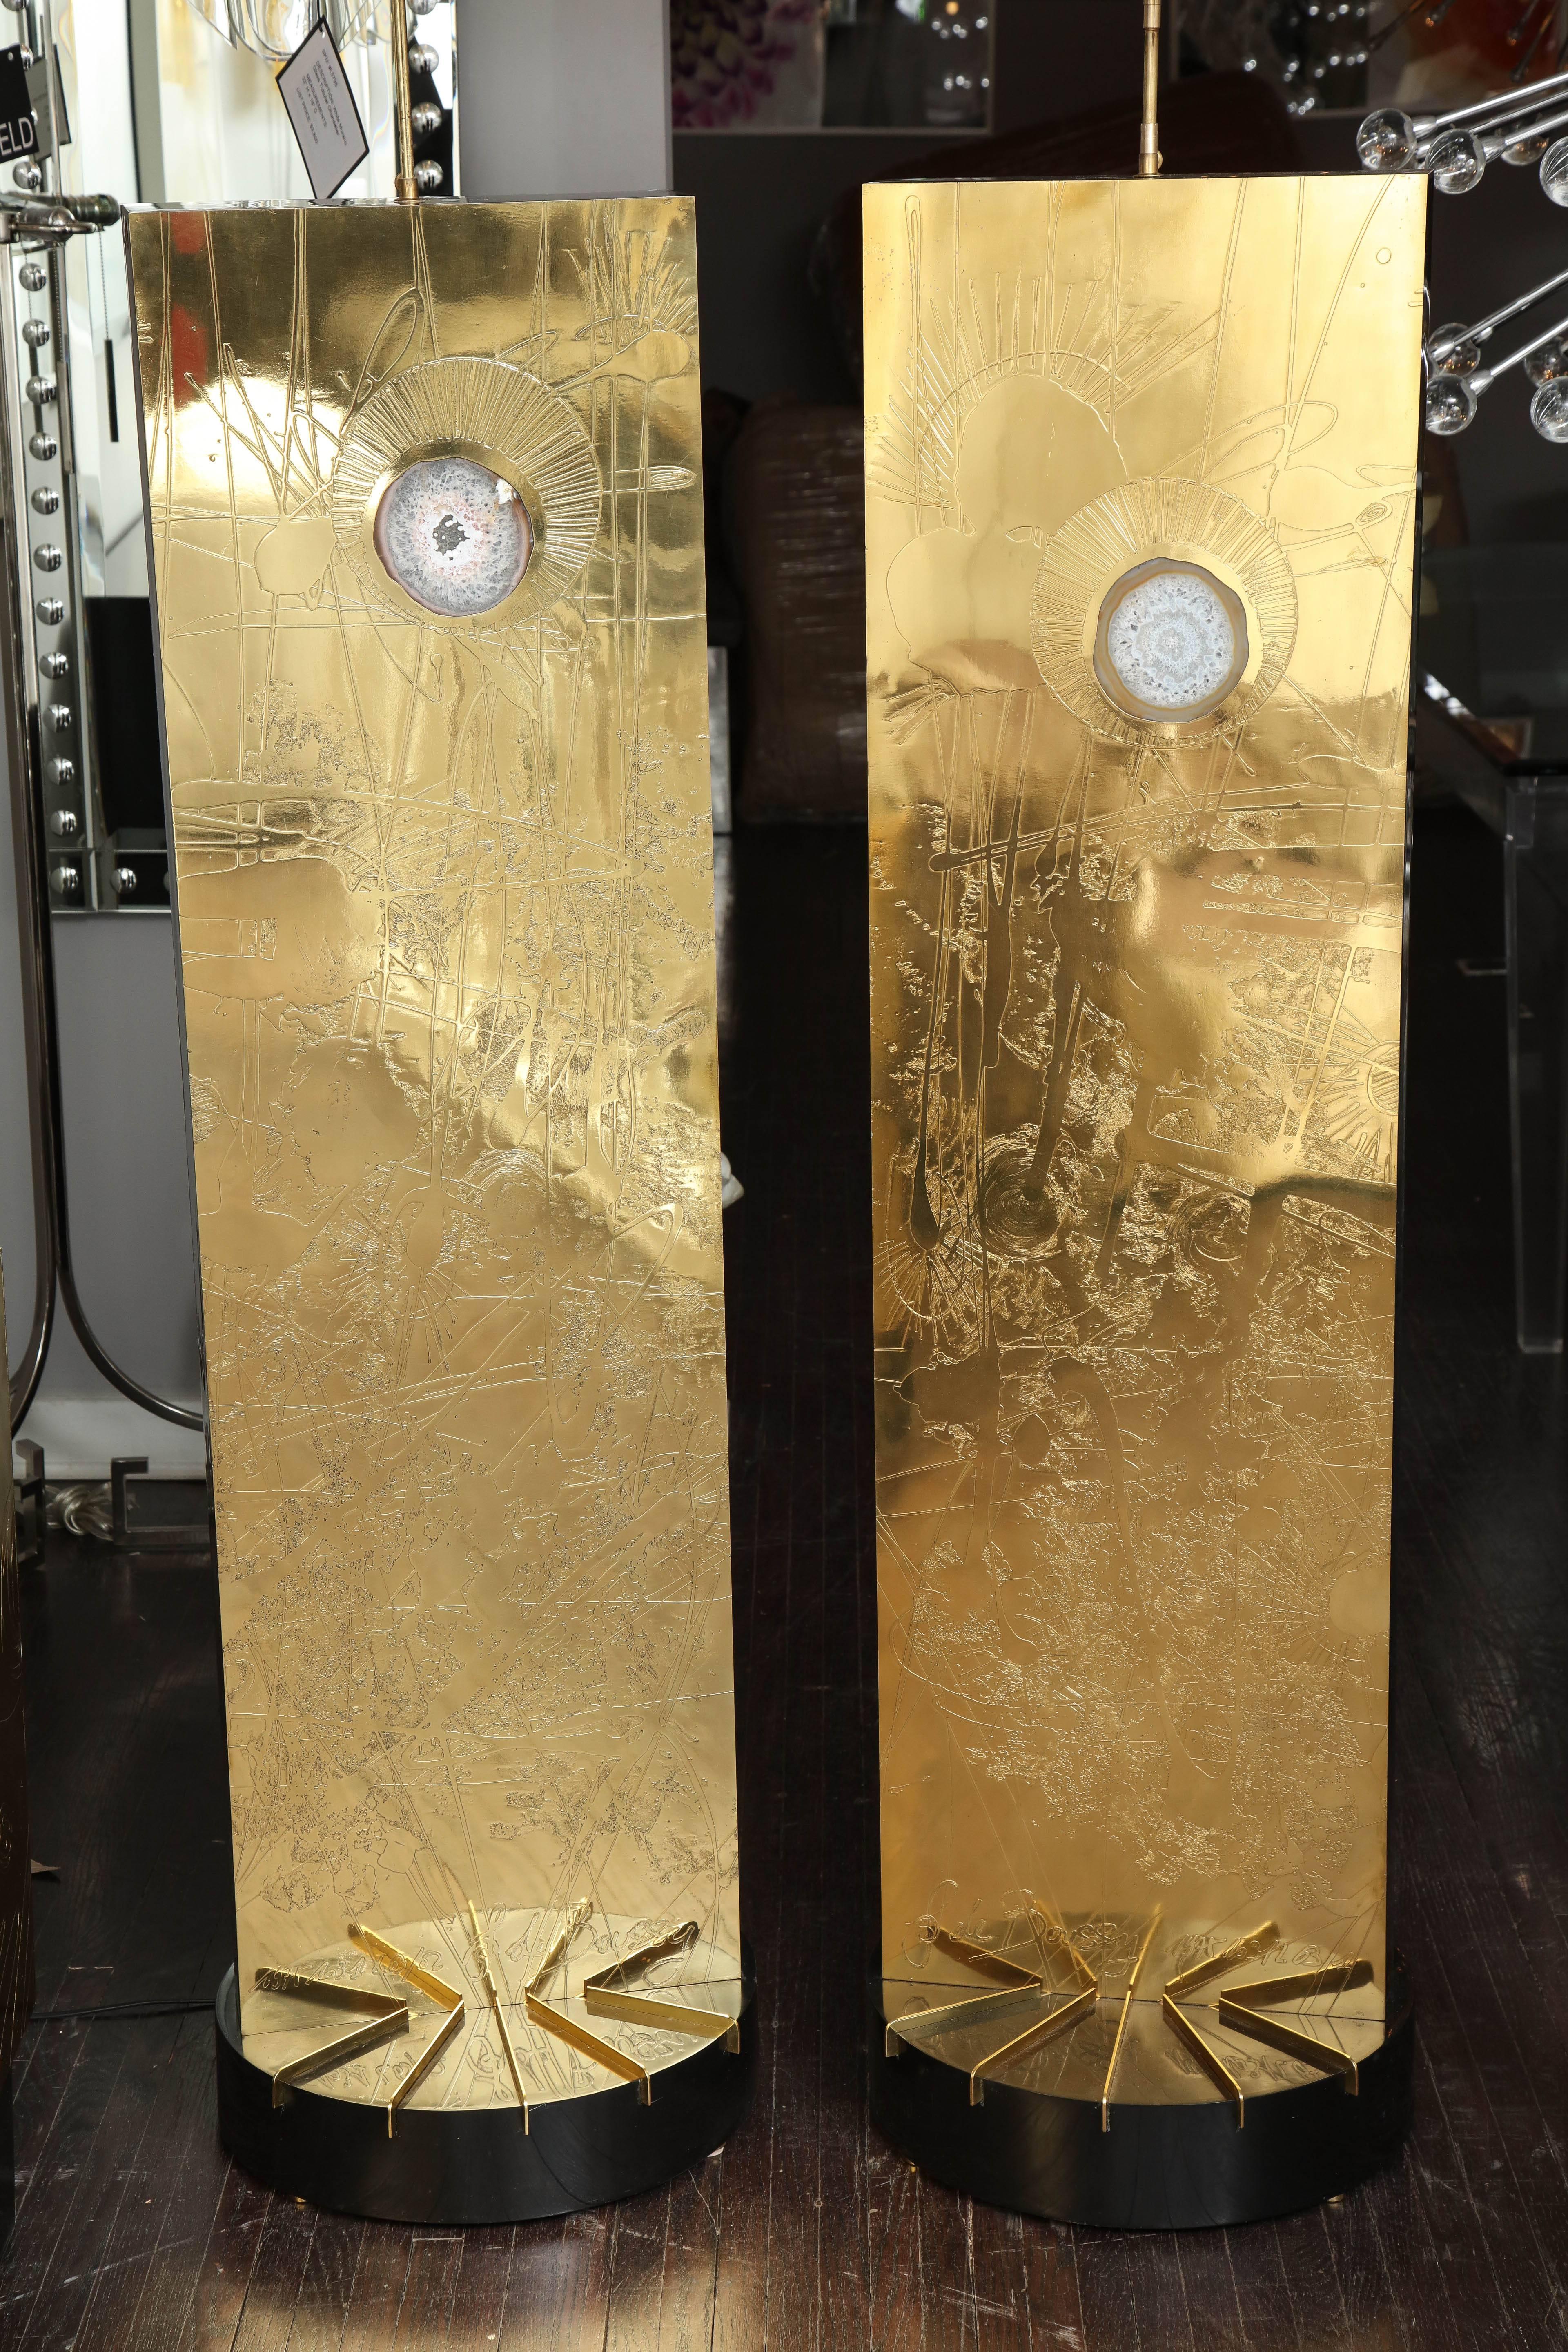 Pair of brass lamps designed by Felix de Boussy for Studio Belgali, signed and dated 1975